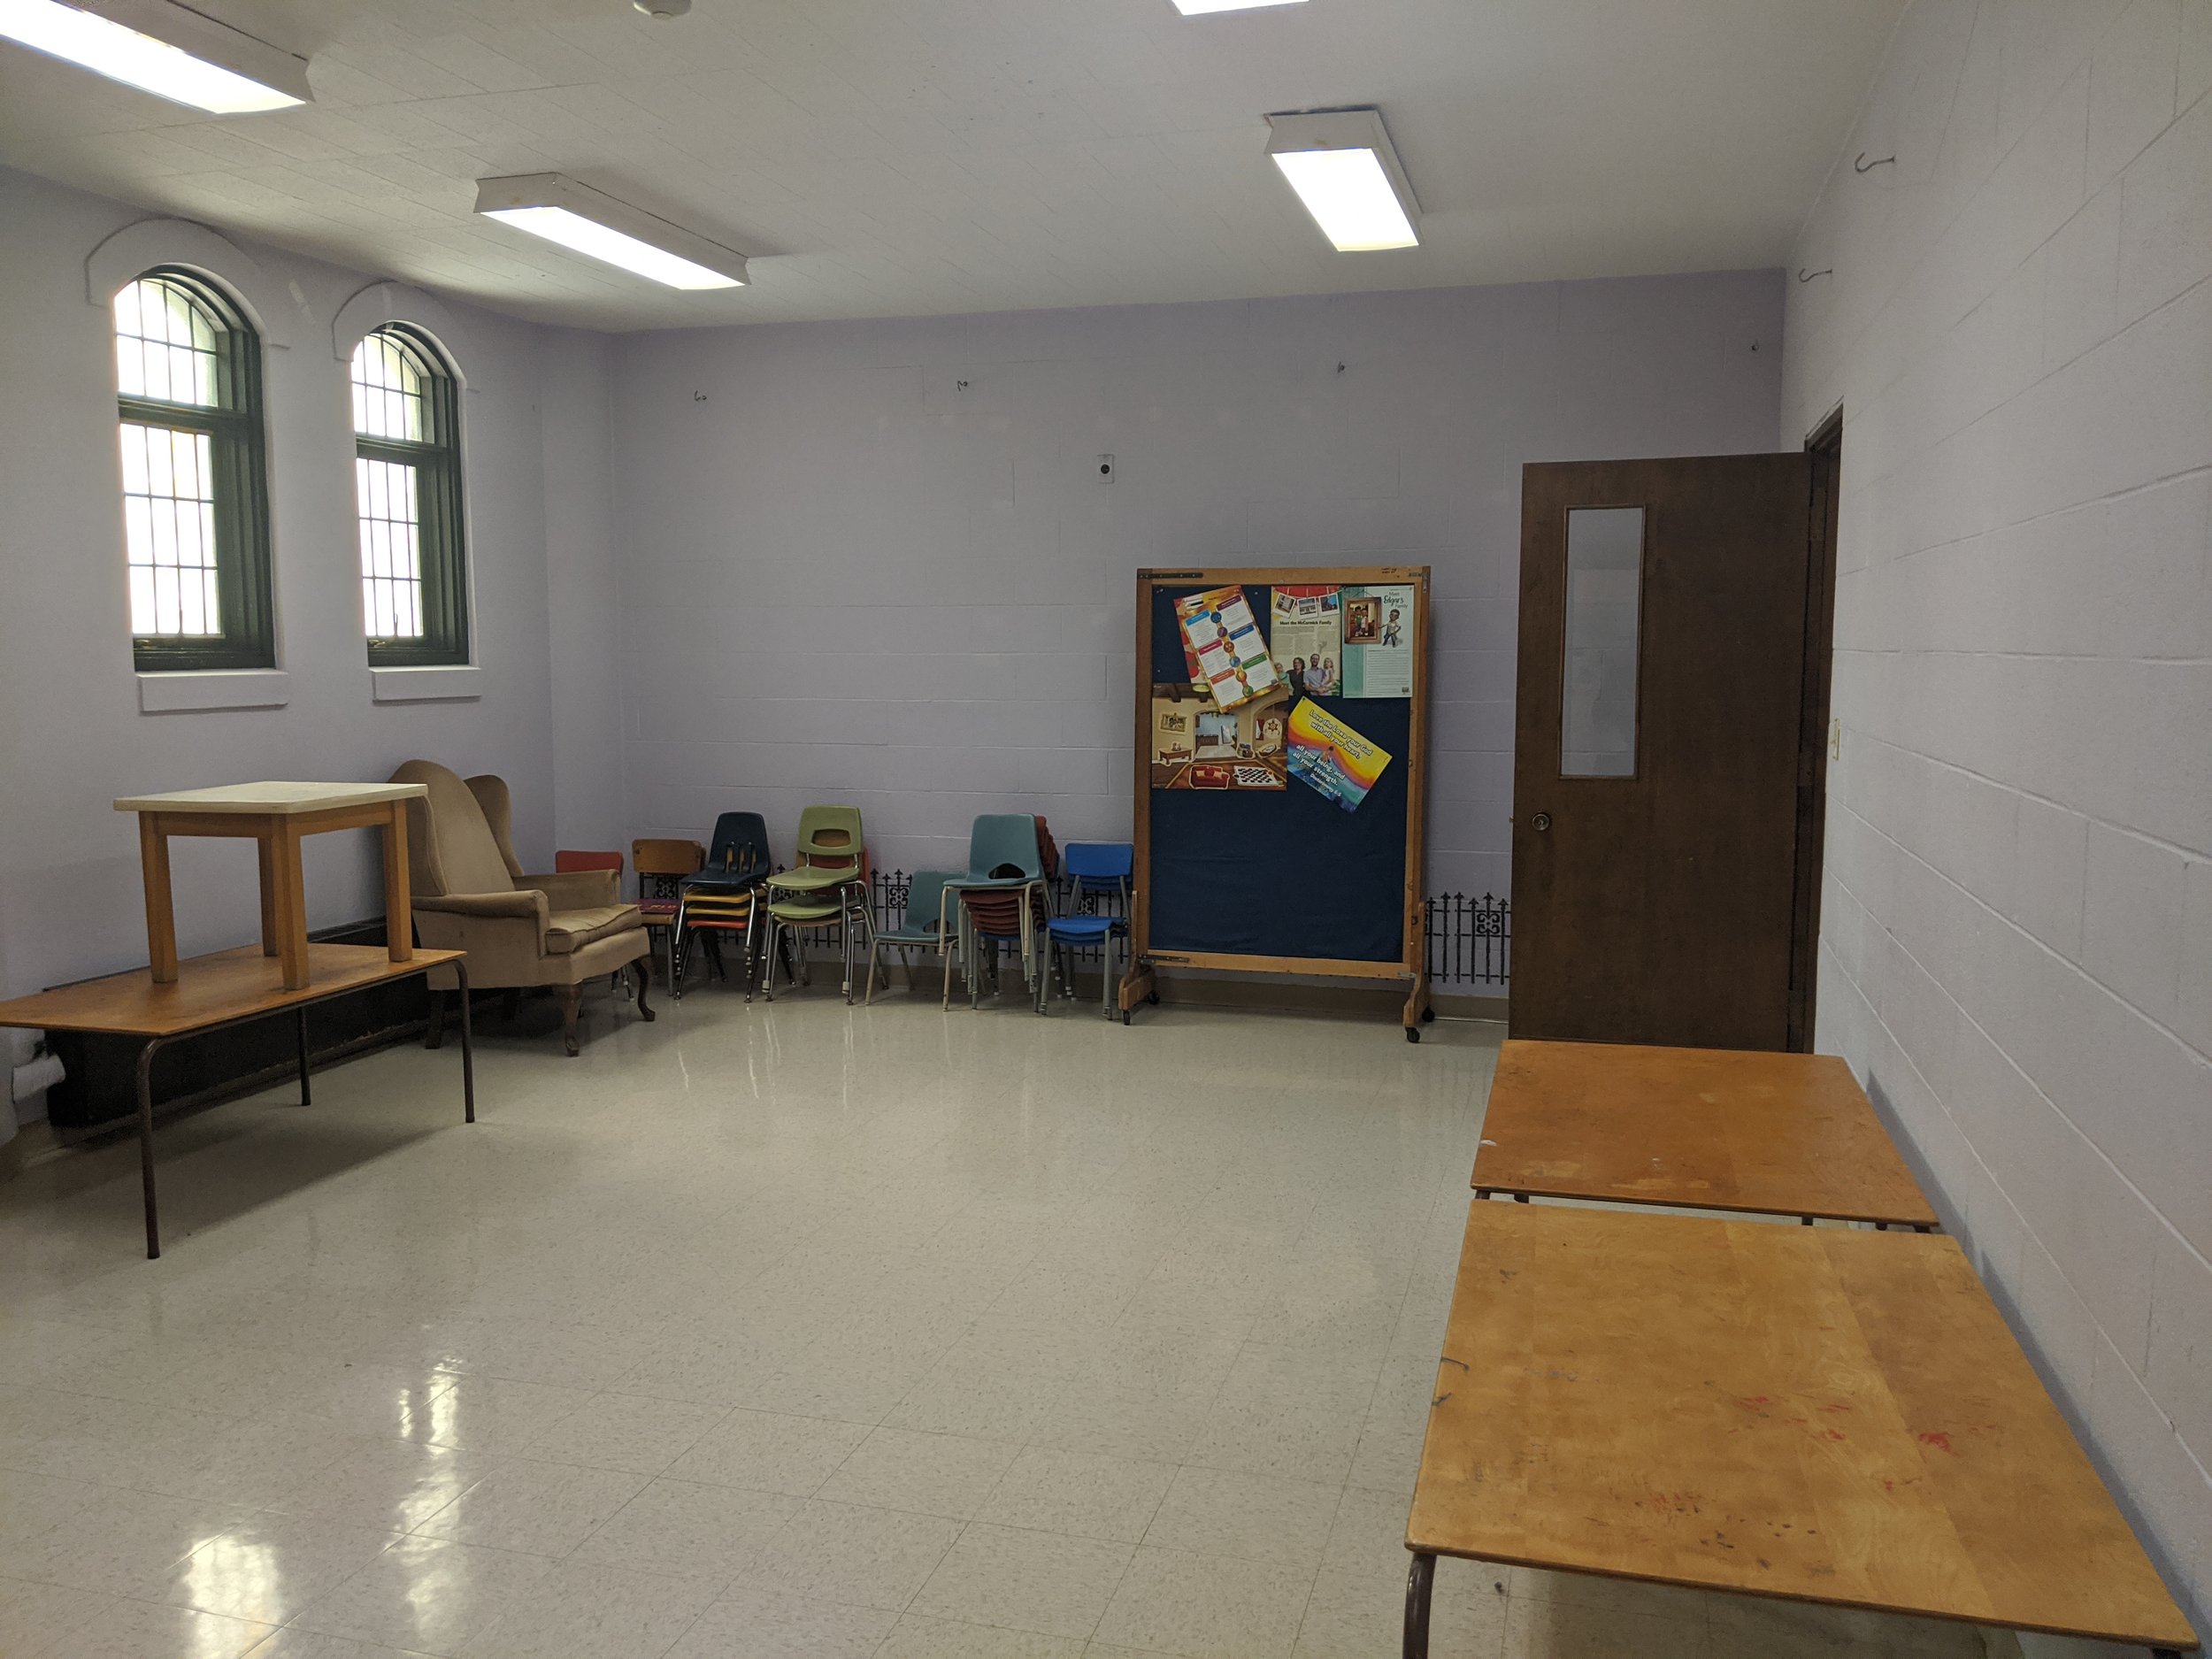 A smaller classroom we plan to use with our Mini Makers (ages 4-6) group this coming summer 2022!